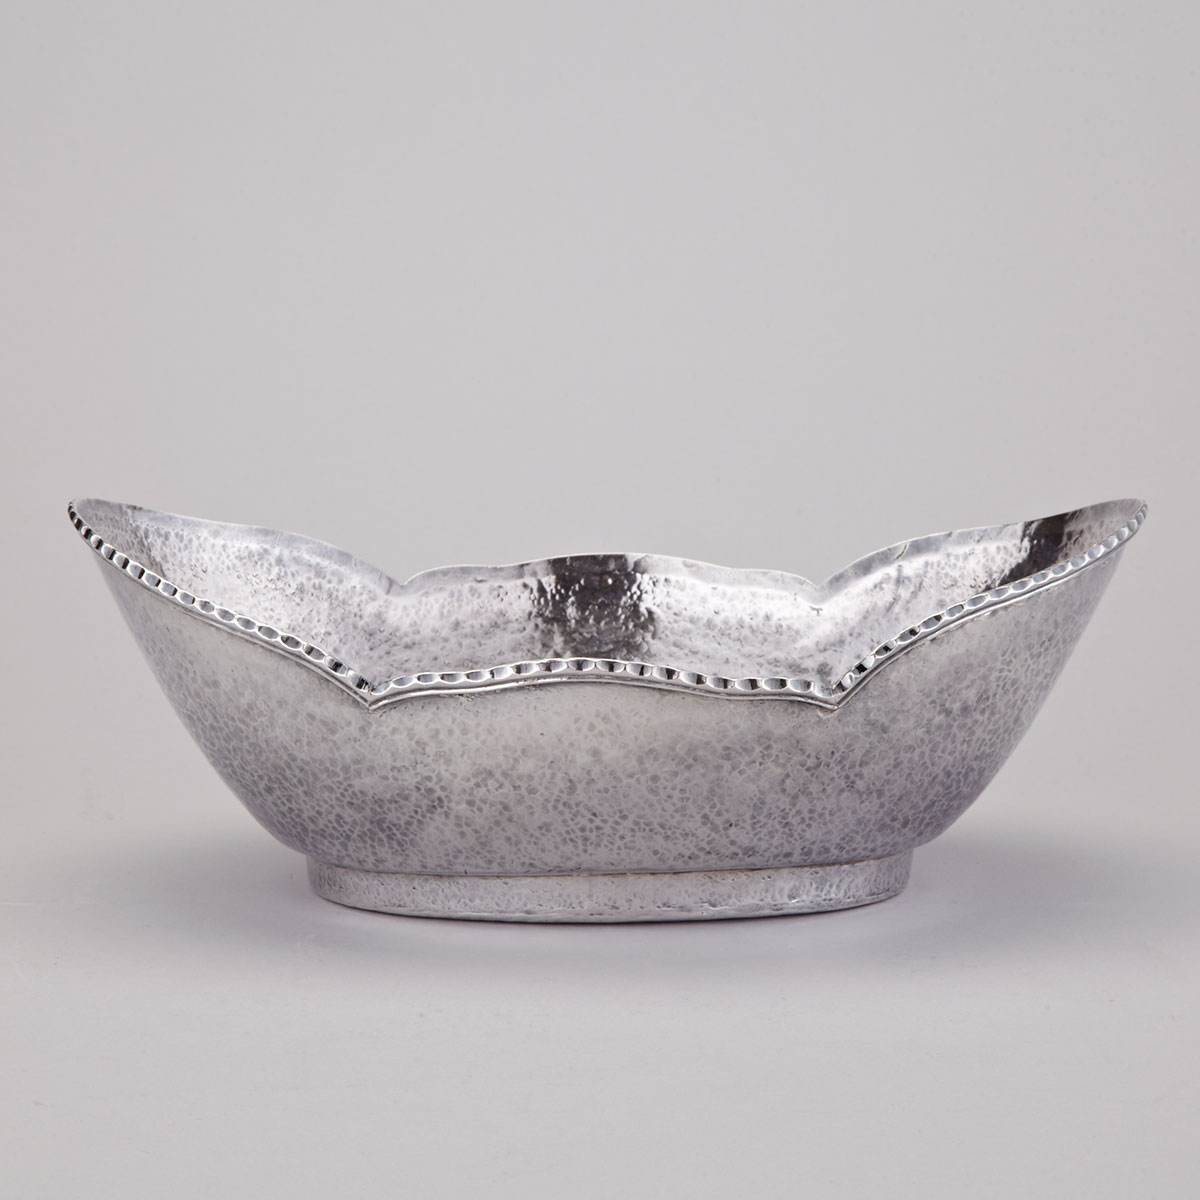 South American Silver Oval Bowl, early 20th century